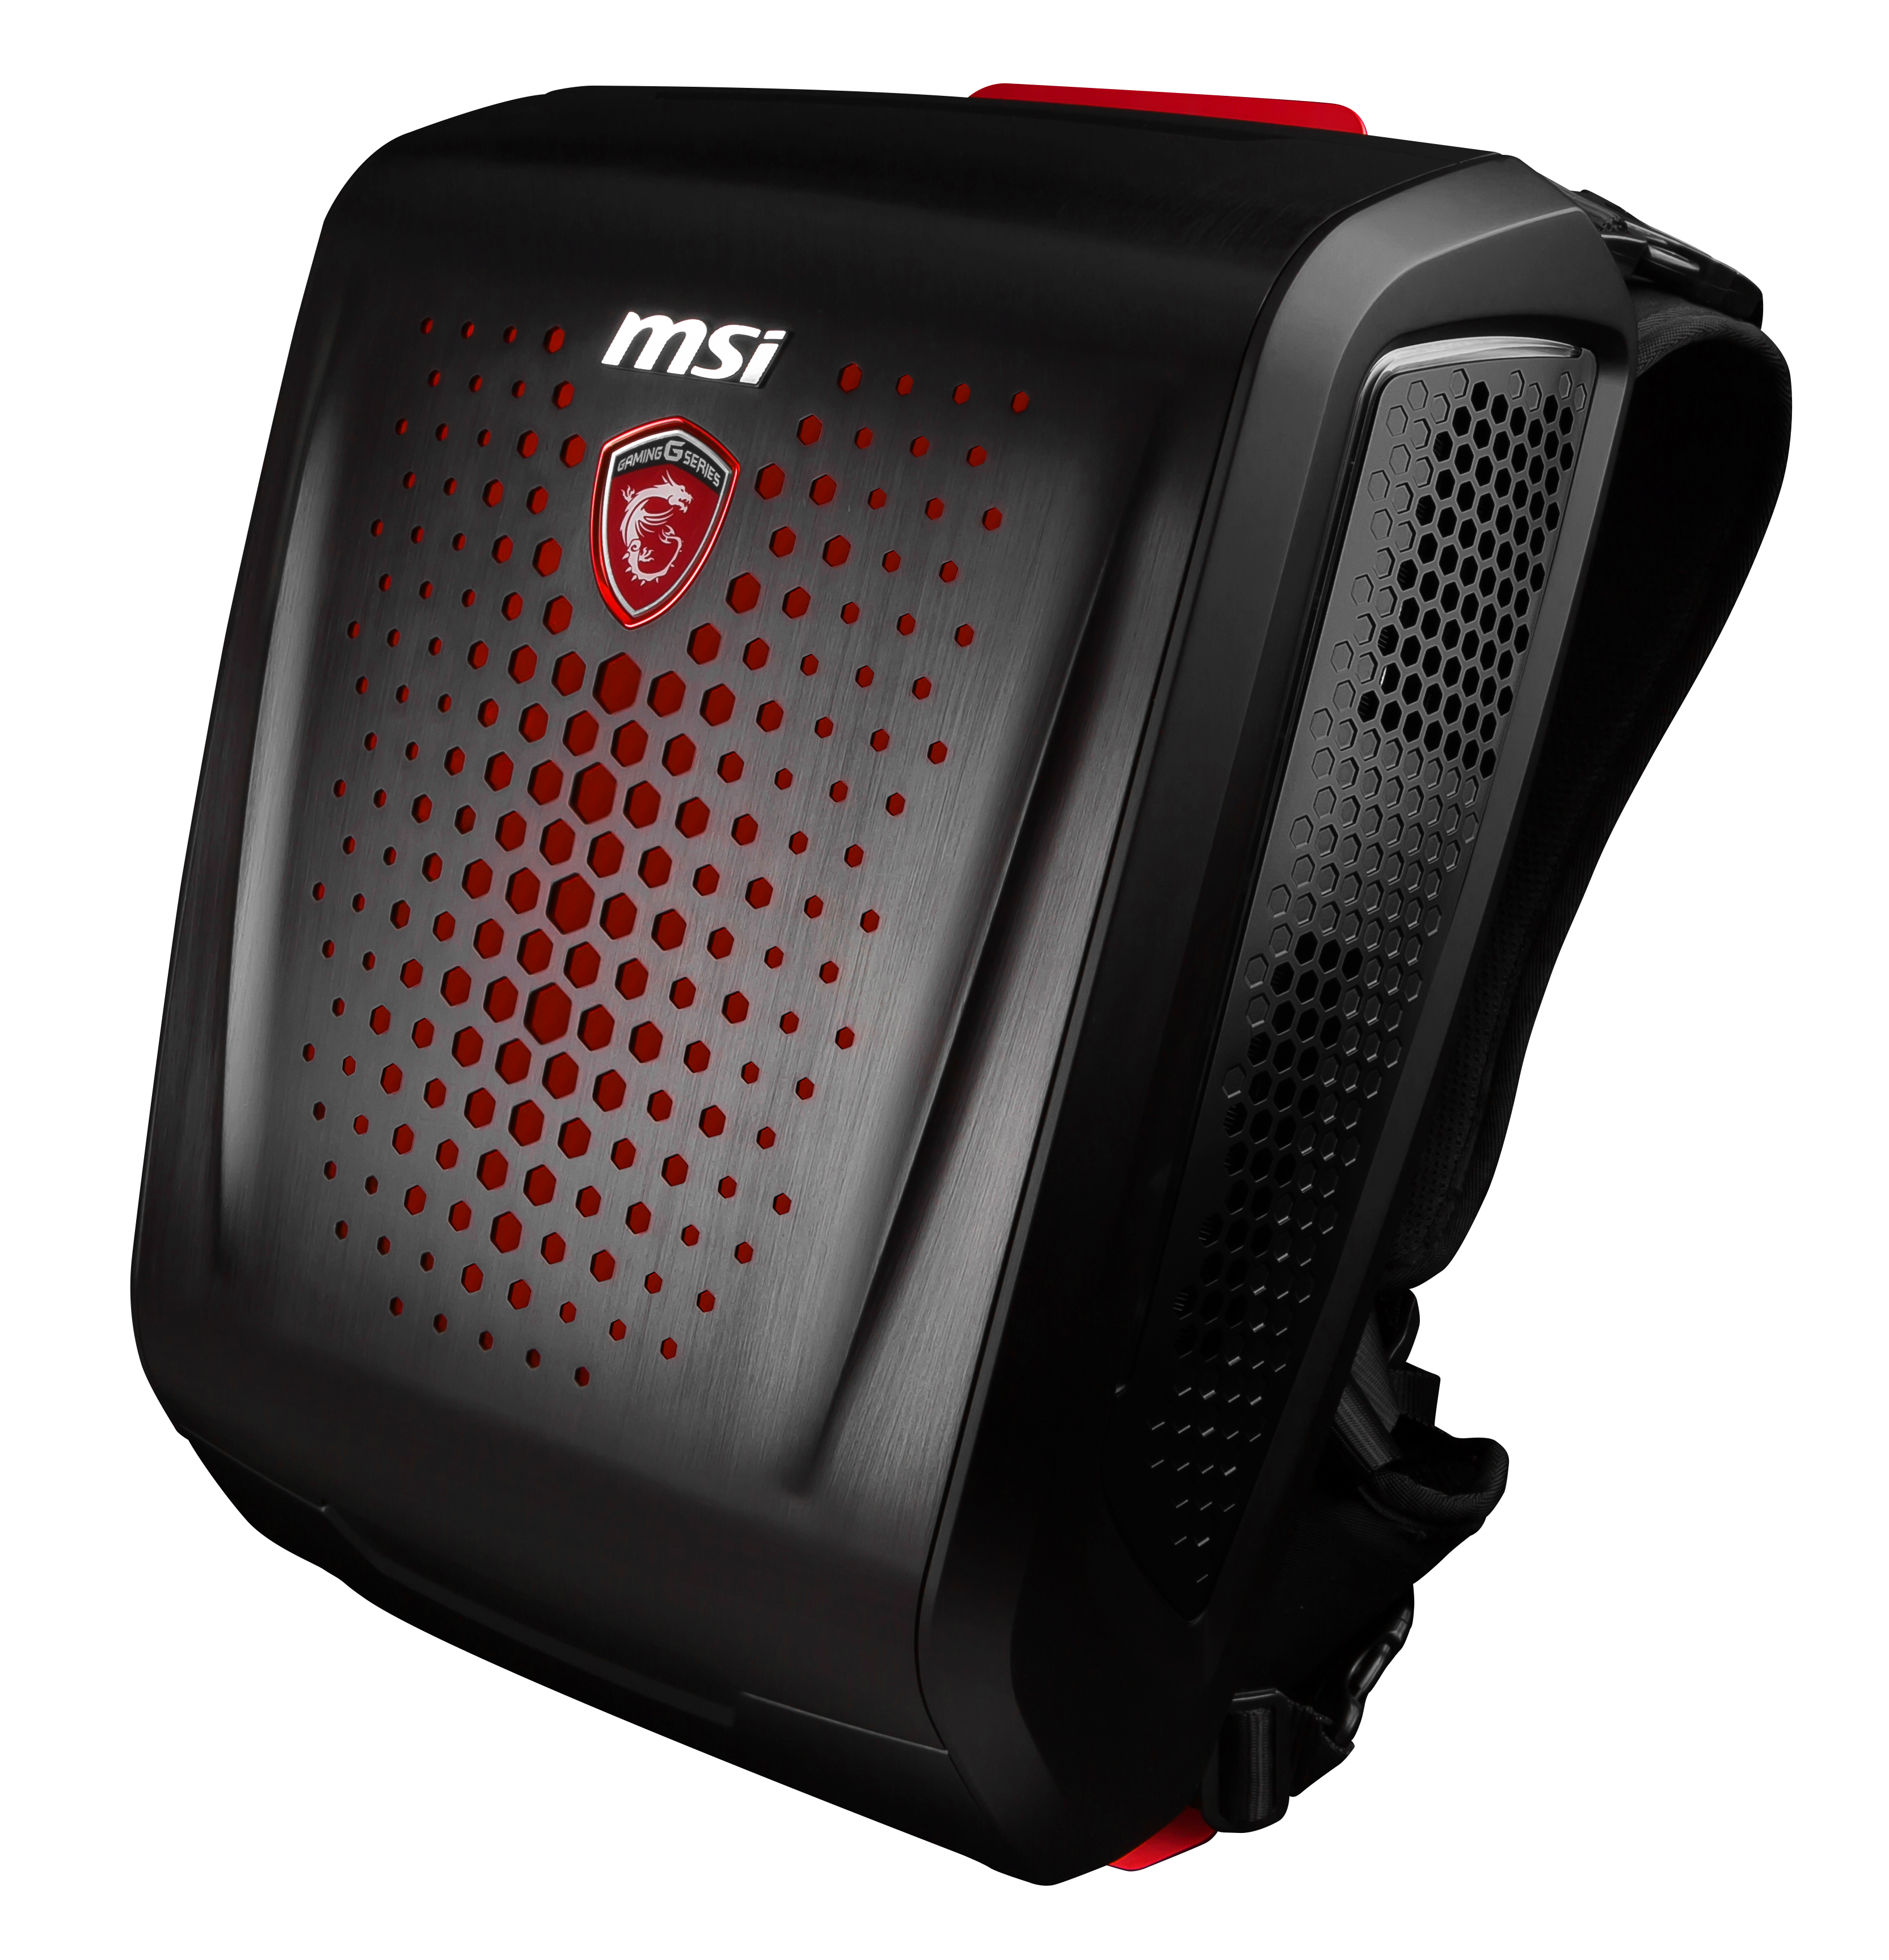 MSI Backpack PC with Windows 10